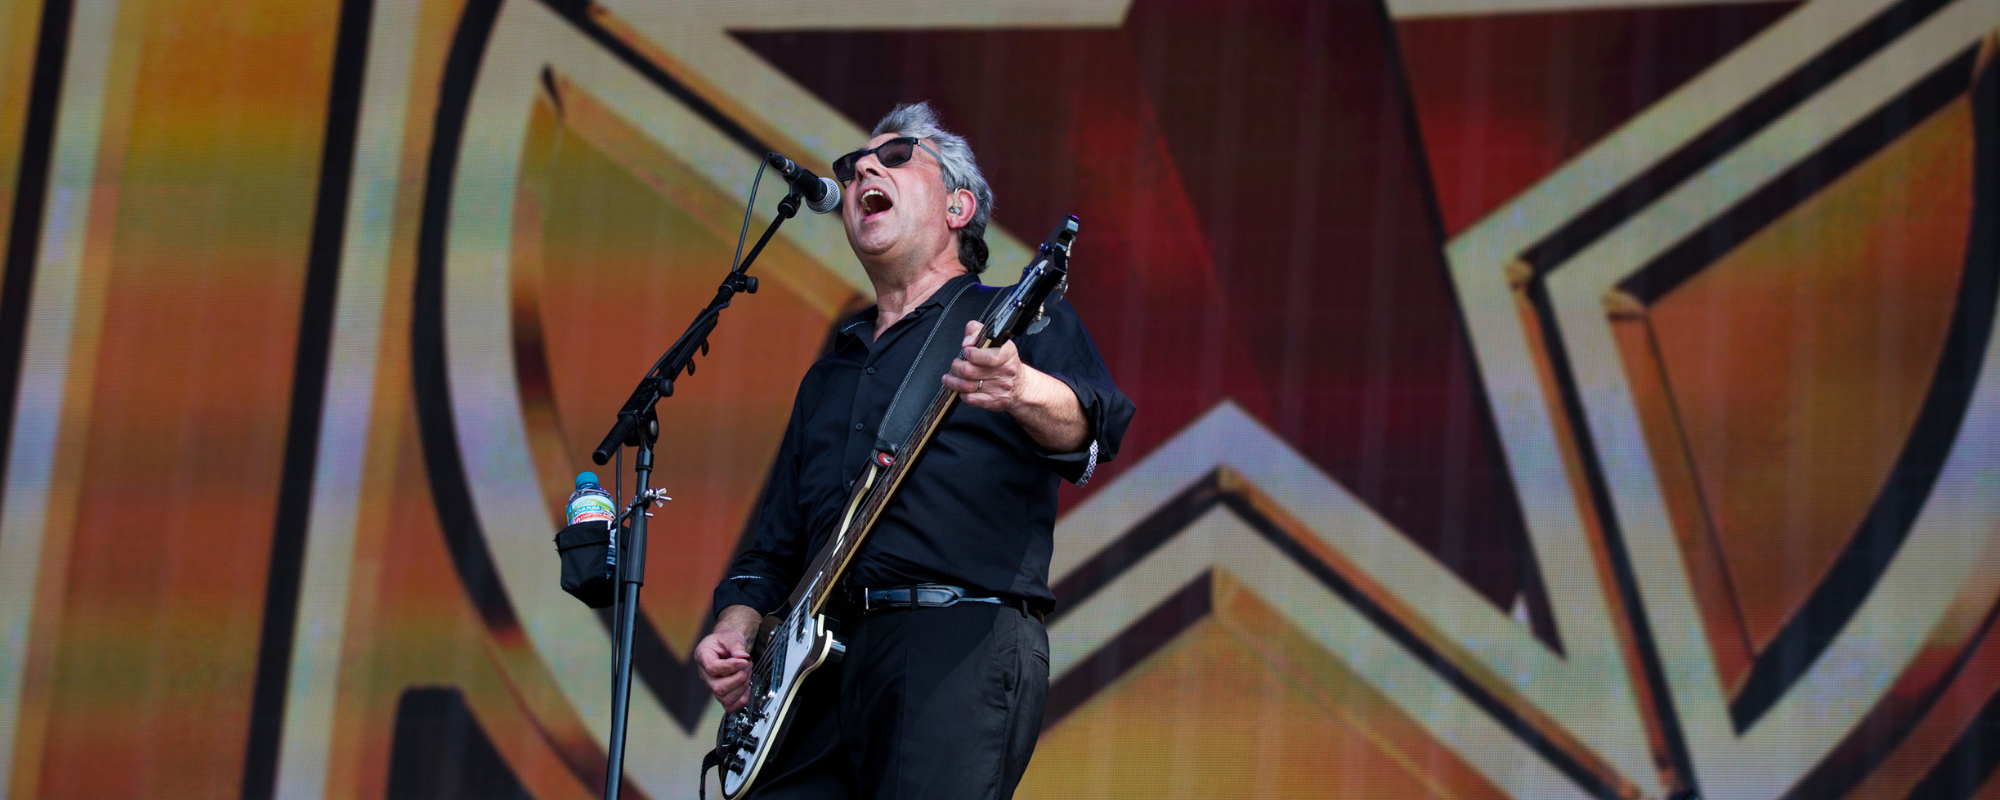 10 Classic Rock Staples You Didn’t Know Were Written by 10cc’s Graham Gouldman, a Founding Father of the British Invasion